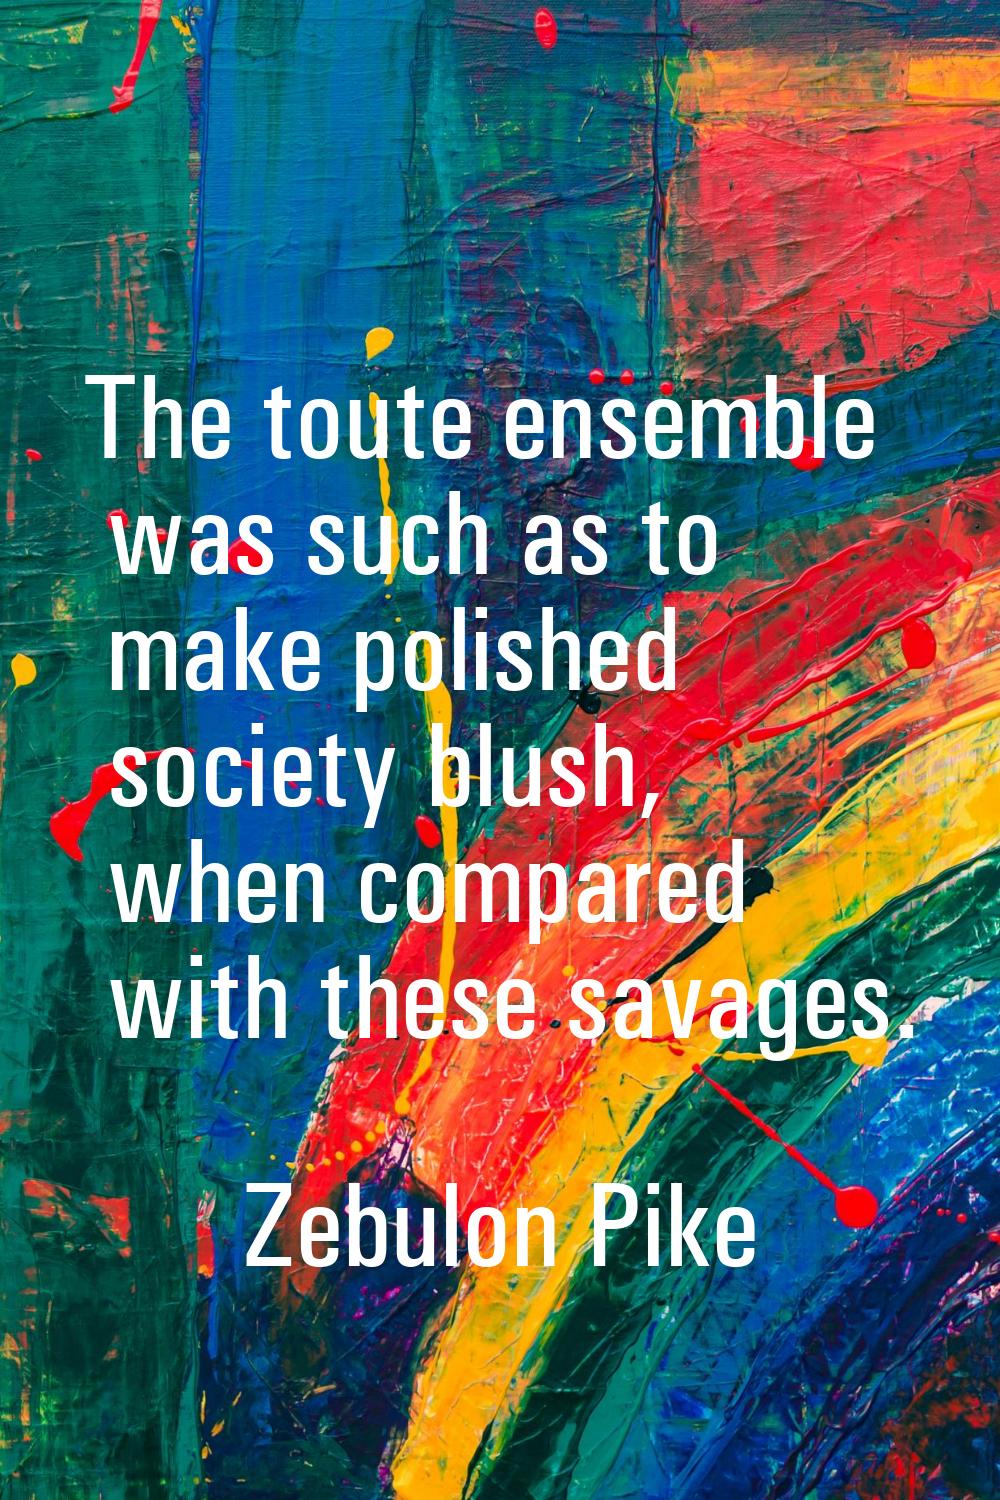 The toute ensemble was such as to make polished society blush, when compared with these savages.